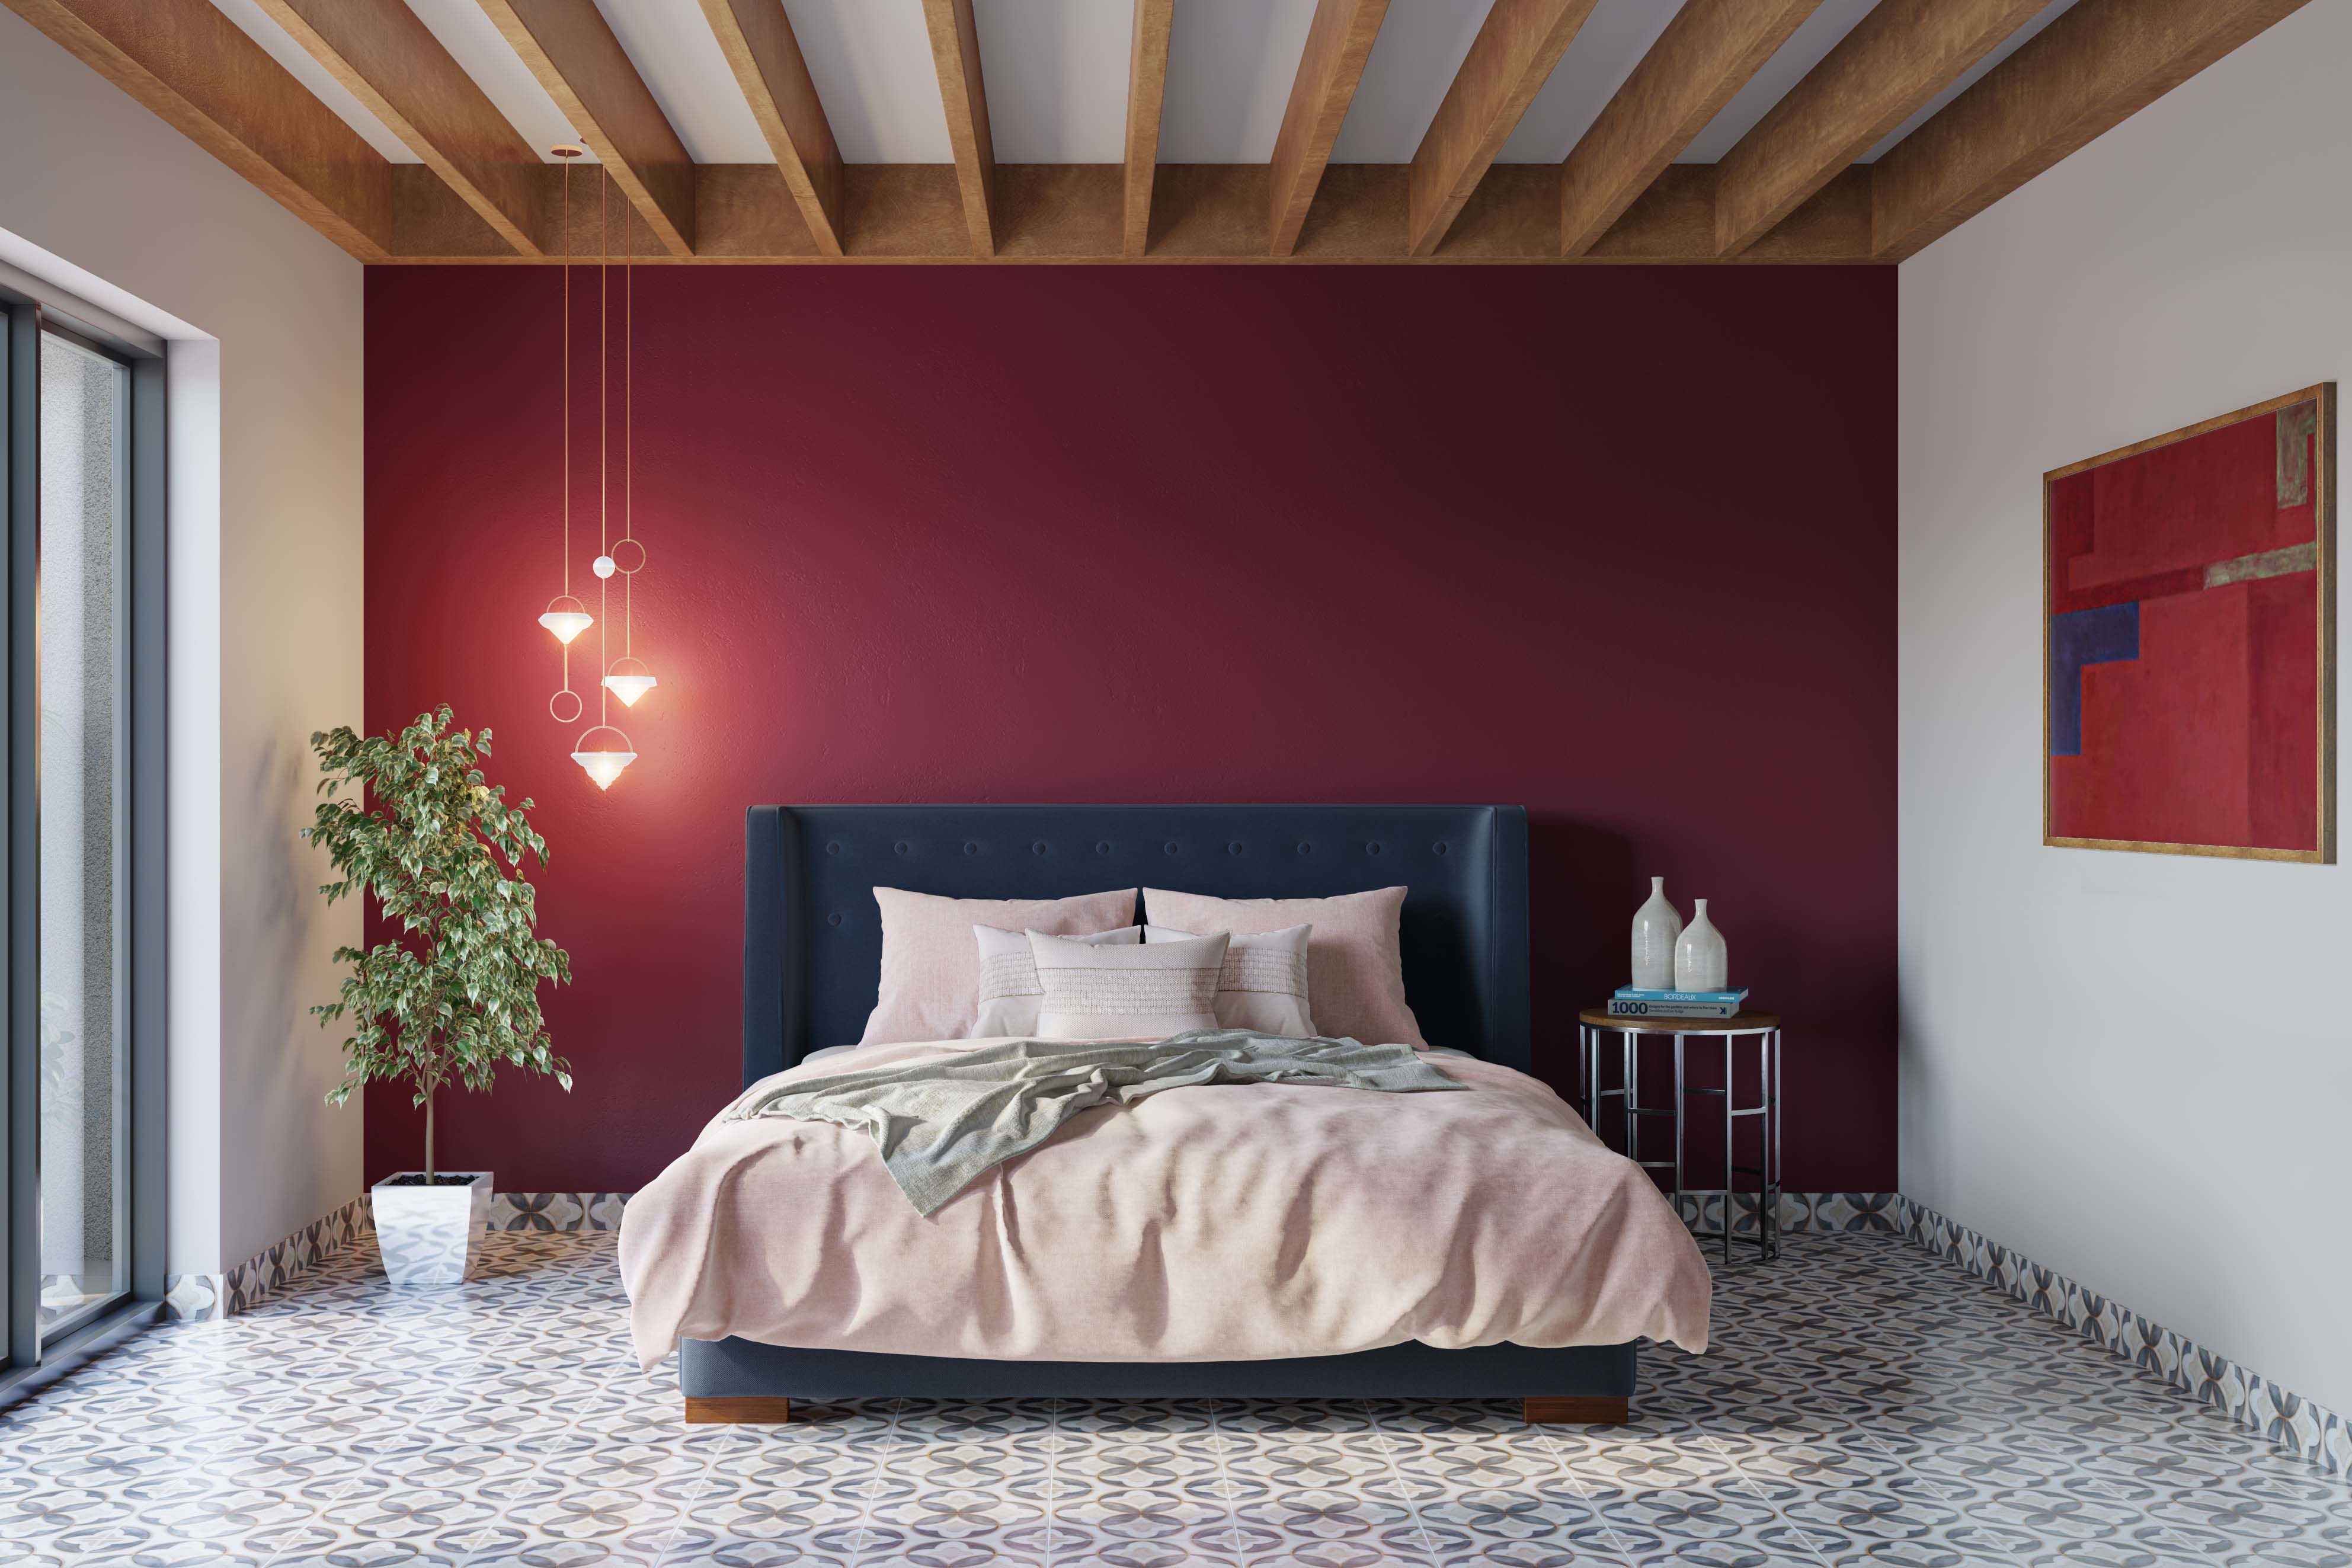 Contemporary Red Bedroom Wall Paint Design With Wooden False Ceiling